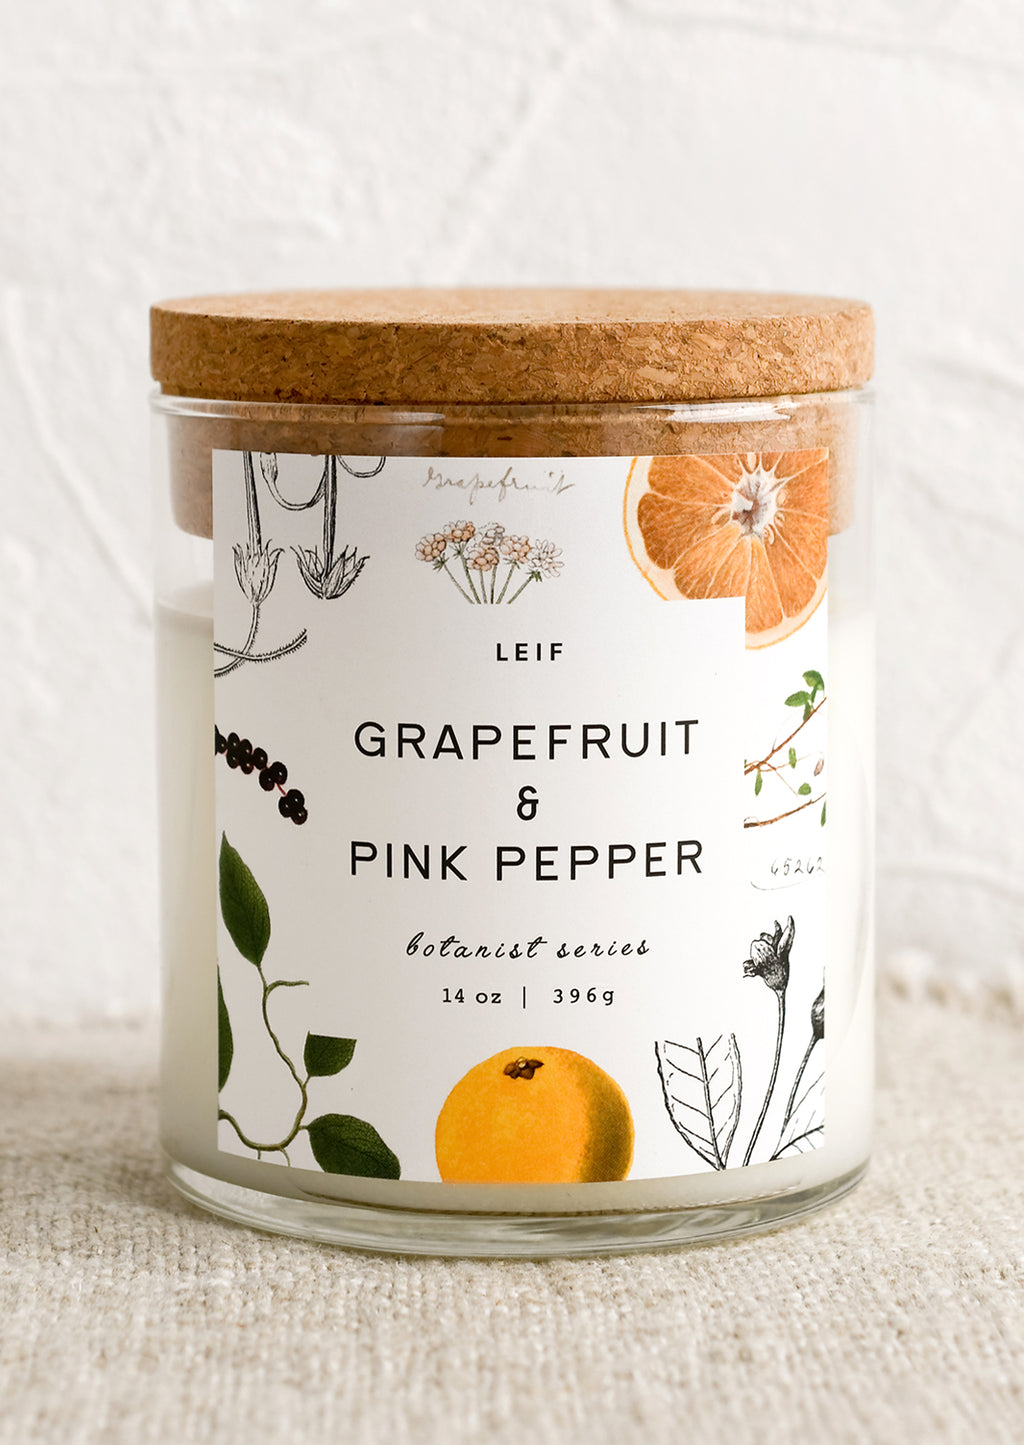 Grapefruit & Pink Pepper: A glass jar candle in Grapefruit & Pink Pepper scent with botanical print label.